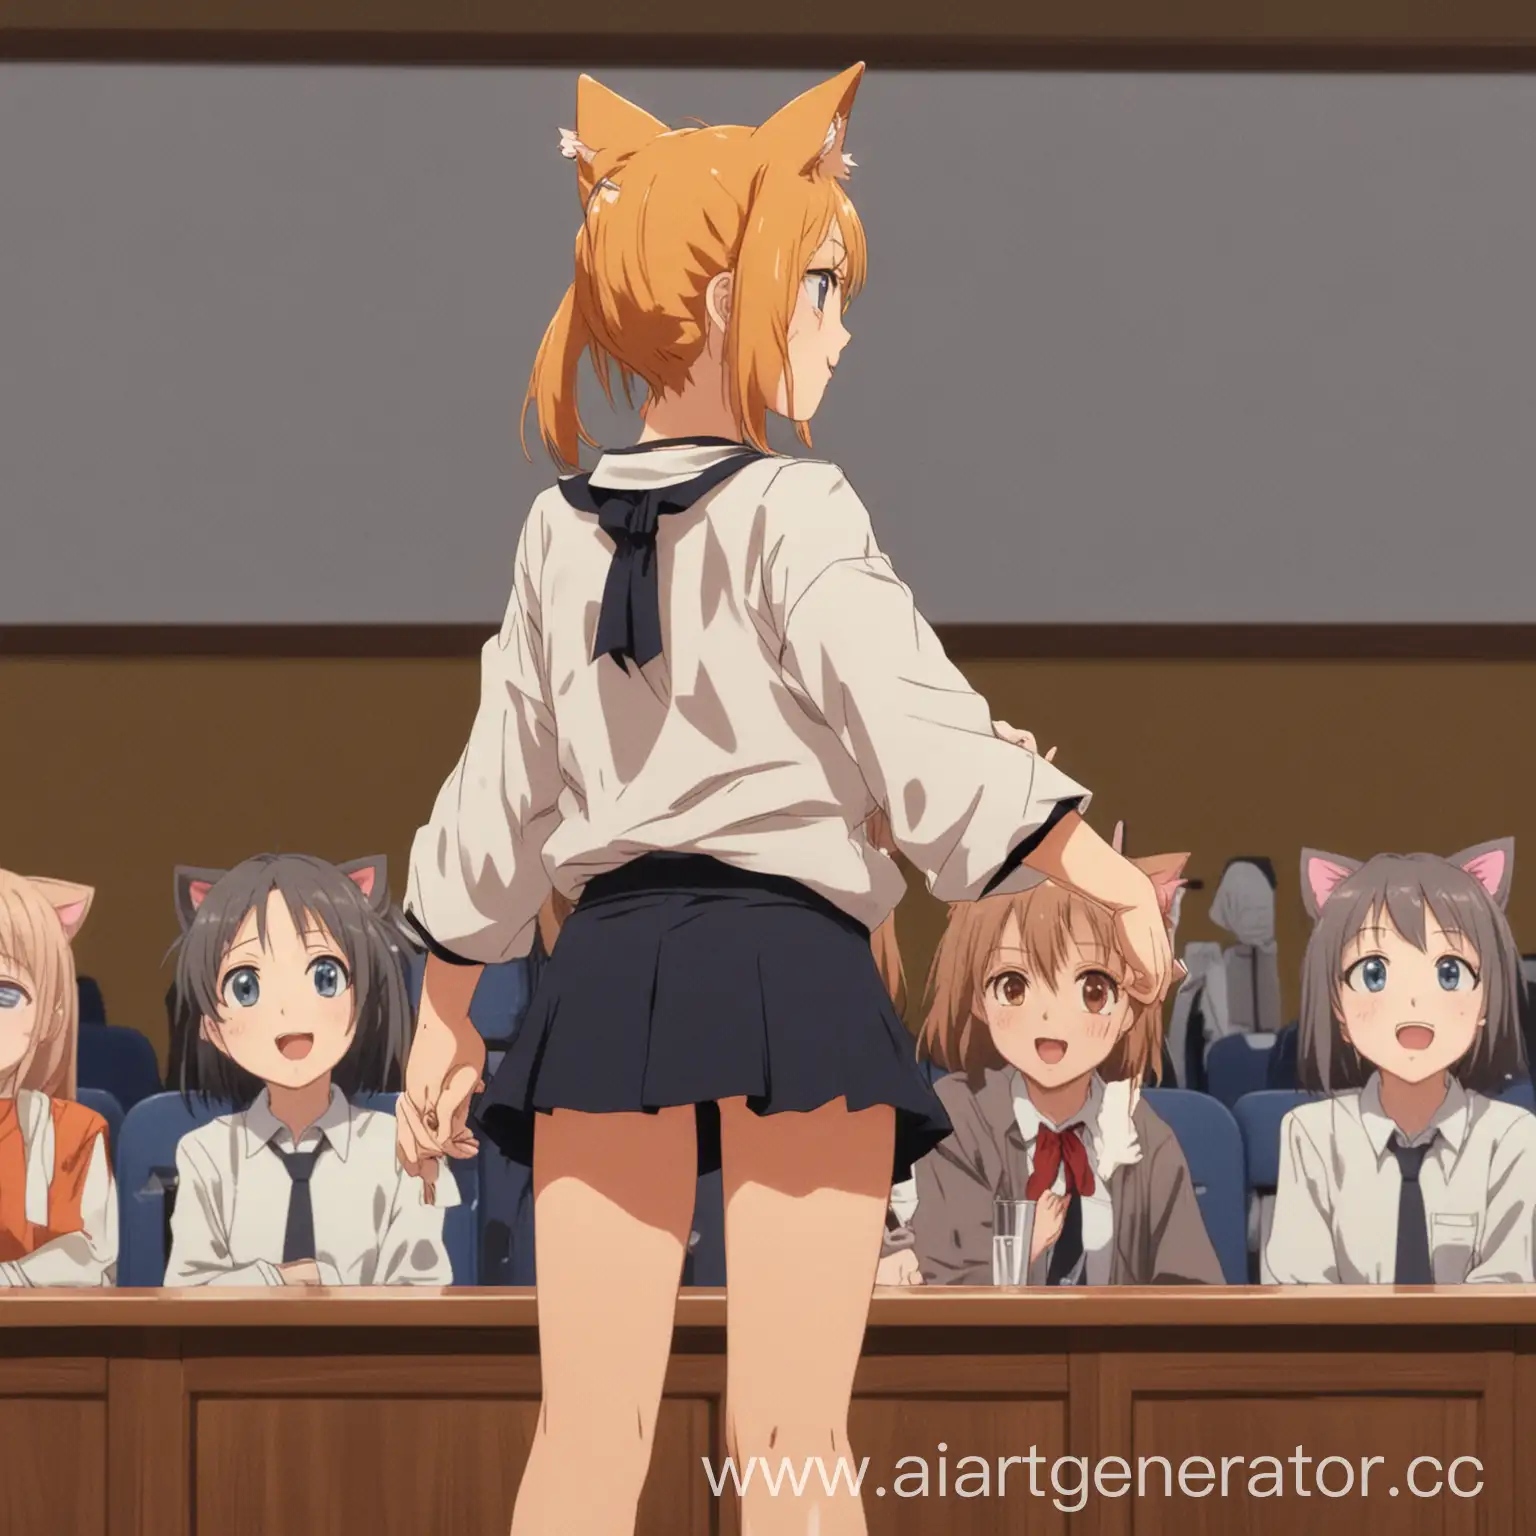 An anime girl with cat ears and a cat's tail sticking out of her back, standing on two legs, gently and sweetly smiling, stands at the lectern and tells something to a crowd of anime students sitting on chairs in front of the lectern, and she looks at the students while we stand and look at them from the side of them.